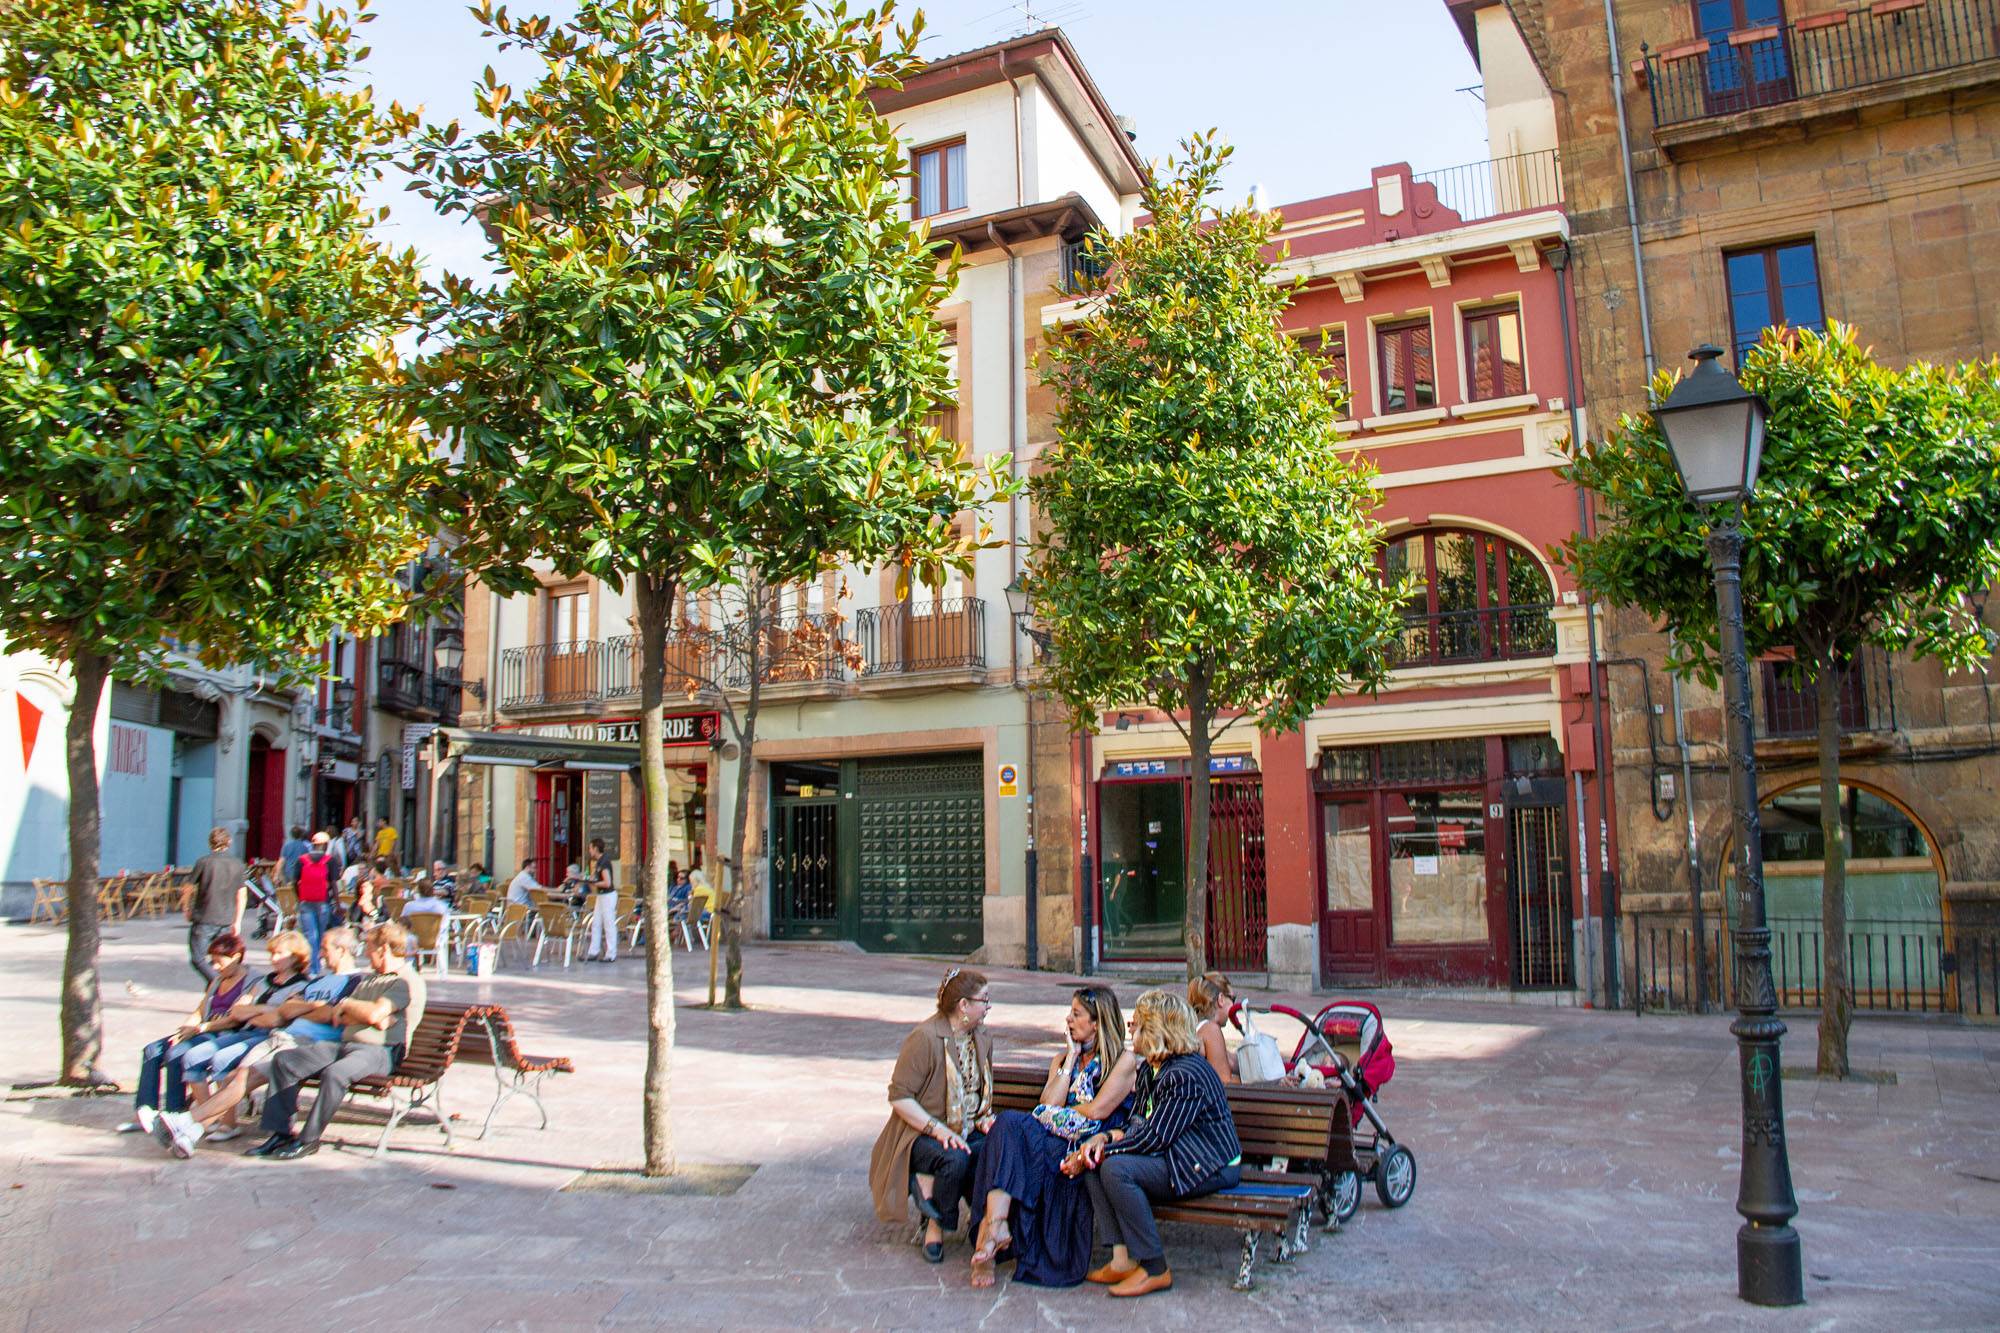 Great For People Watching - Plaza del Riego